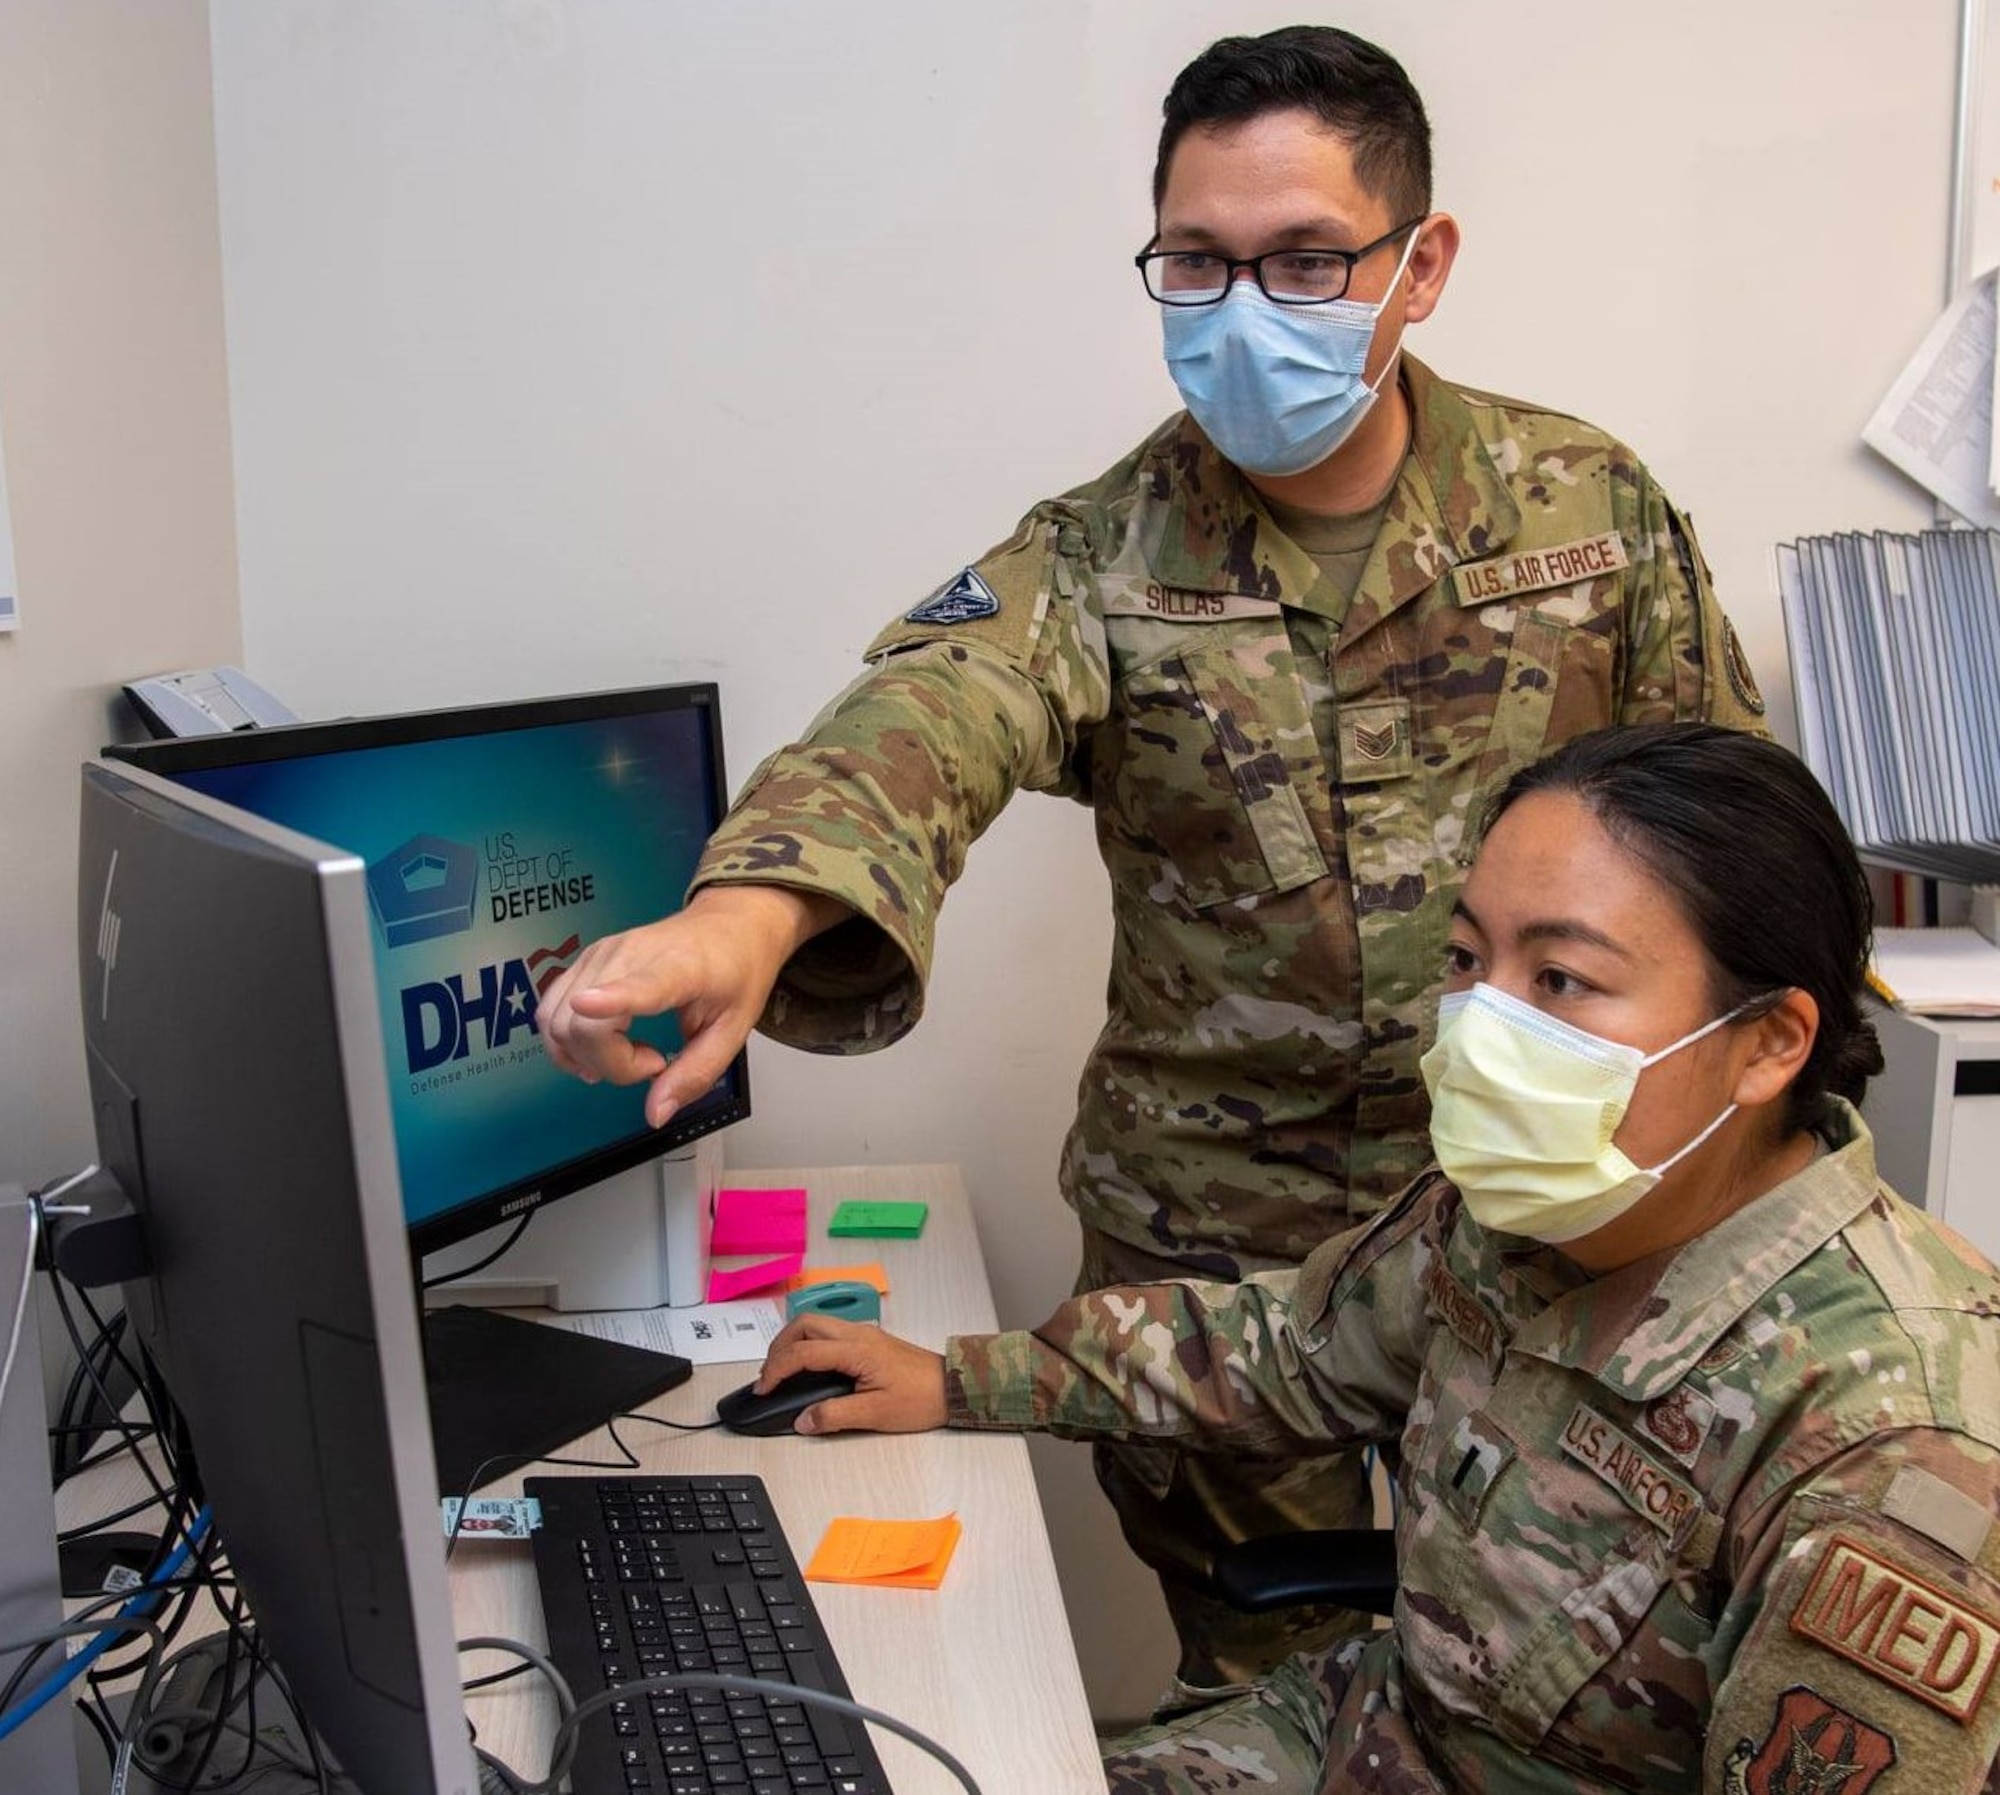 Earlier this fall, members of the 624th Aeromedical Staging Squadron (ASTS) gained hands-on training with the new electronic medical health records system being rolled out across all branches of the Department of Defense.